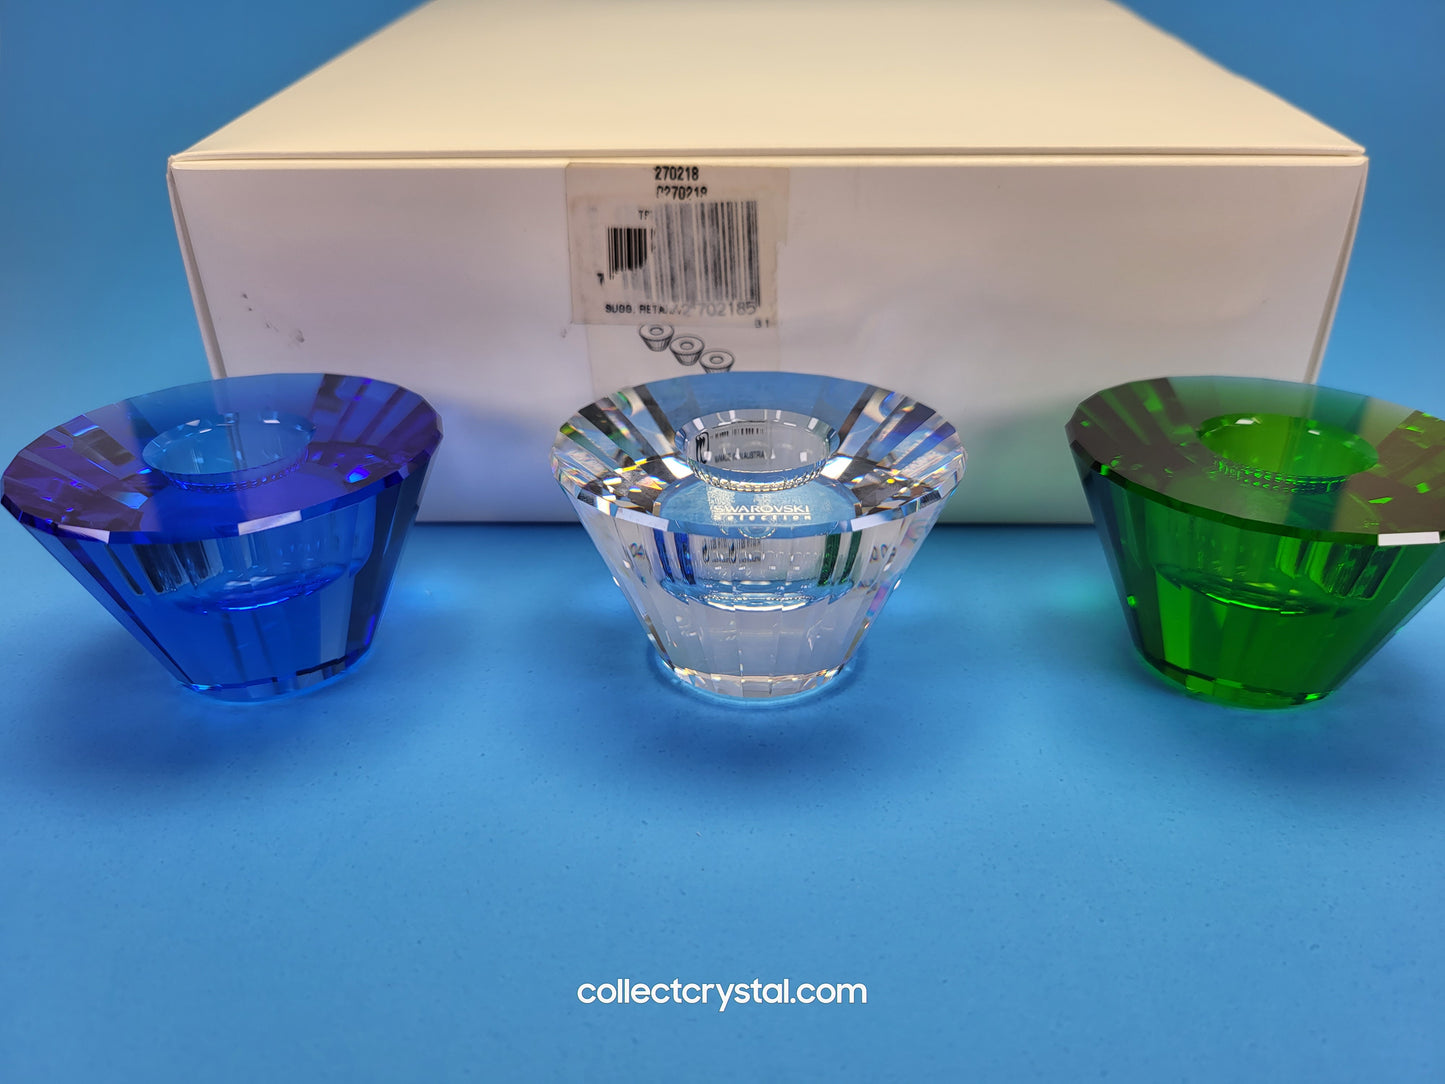 Candleholder Set Trio set 270218 Home Decor Emerald Sapphire and clear Wedding Gift Accessories